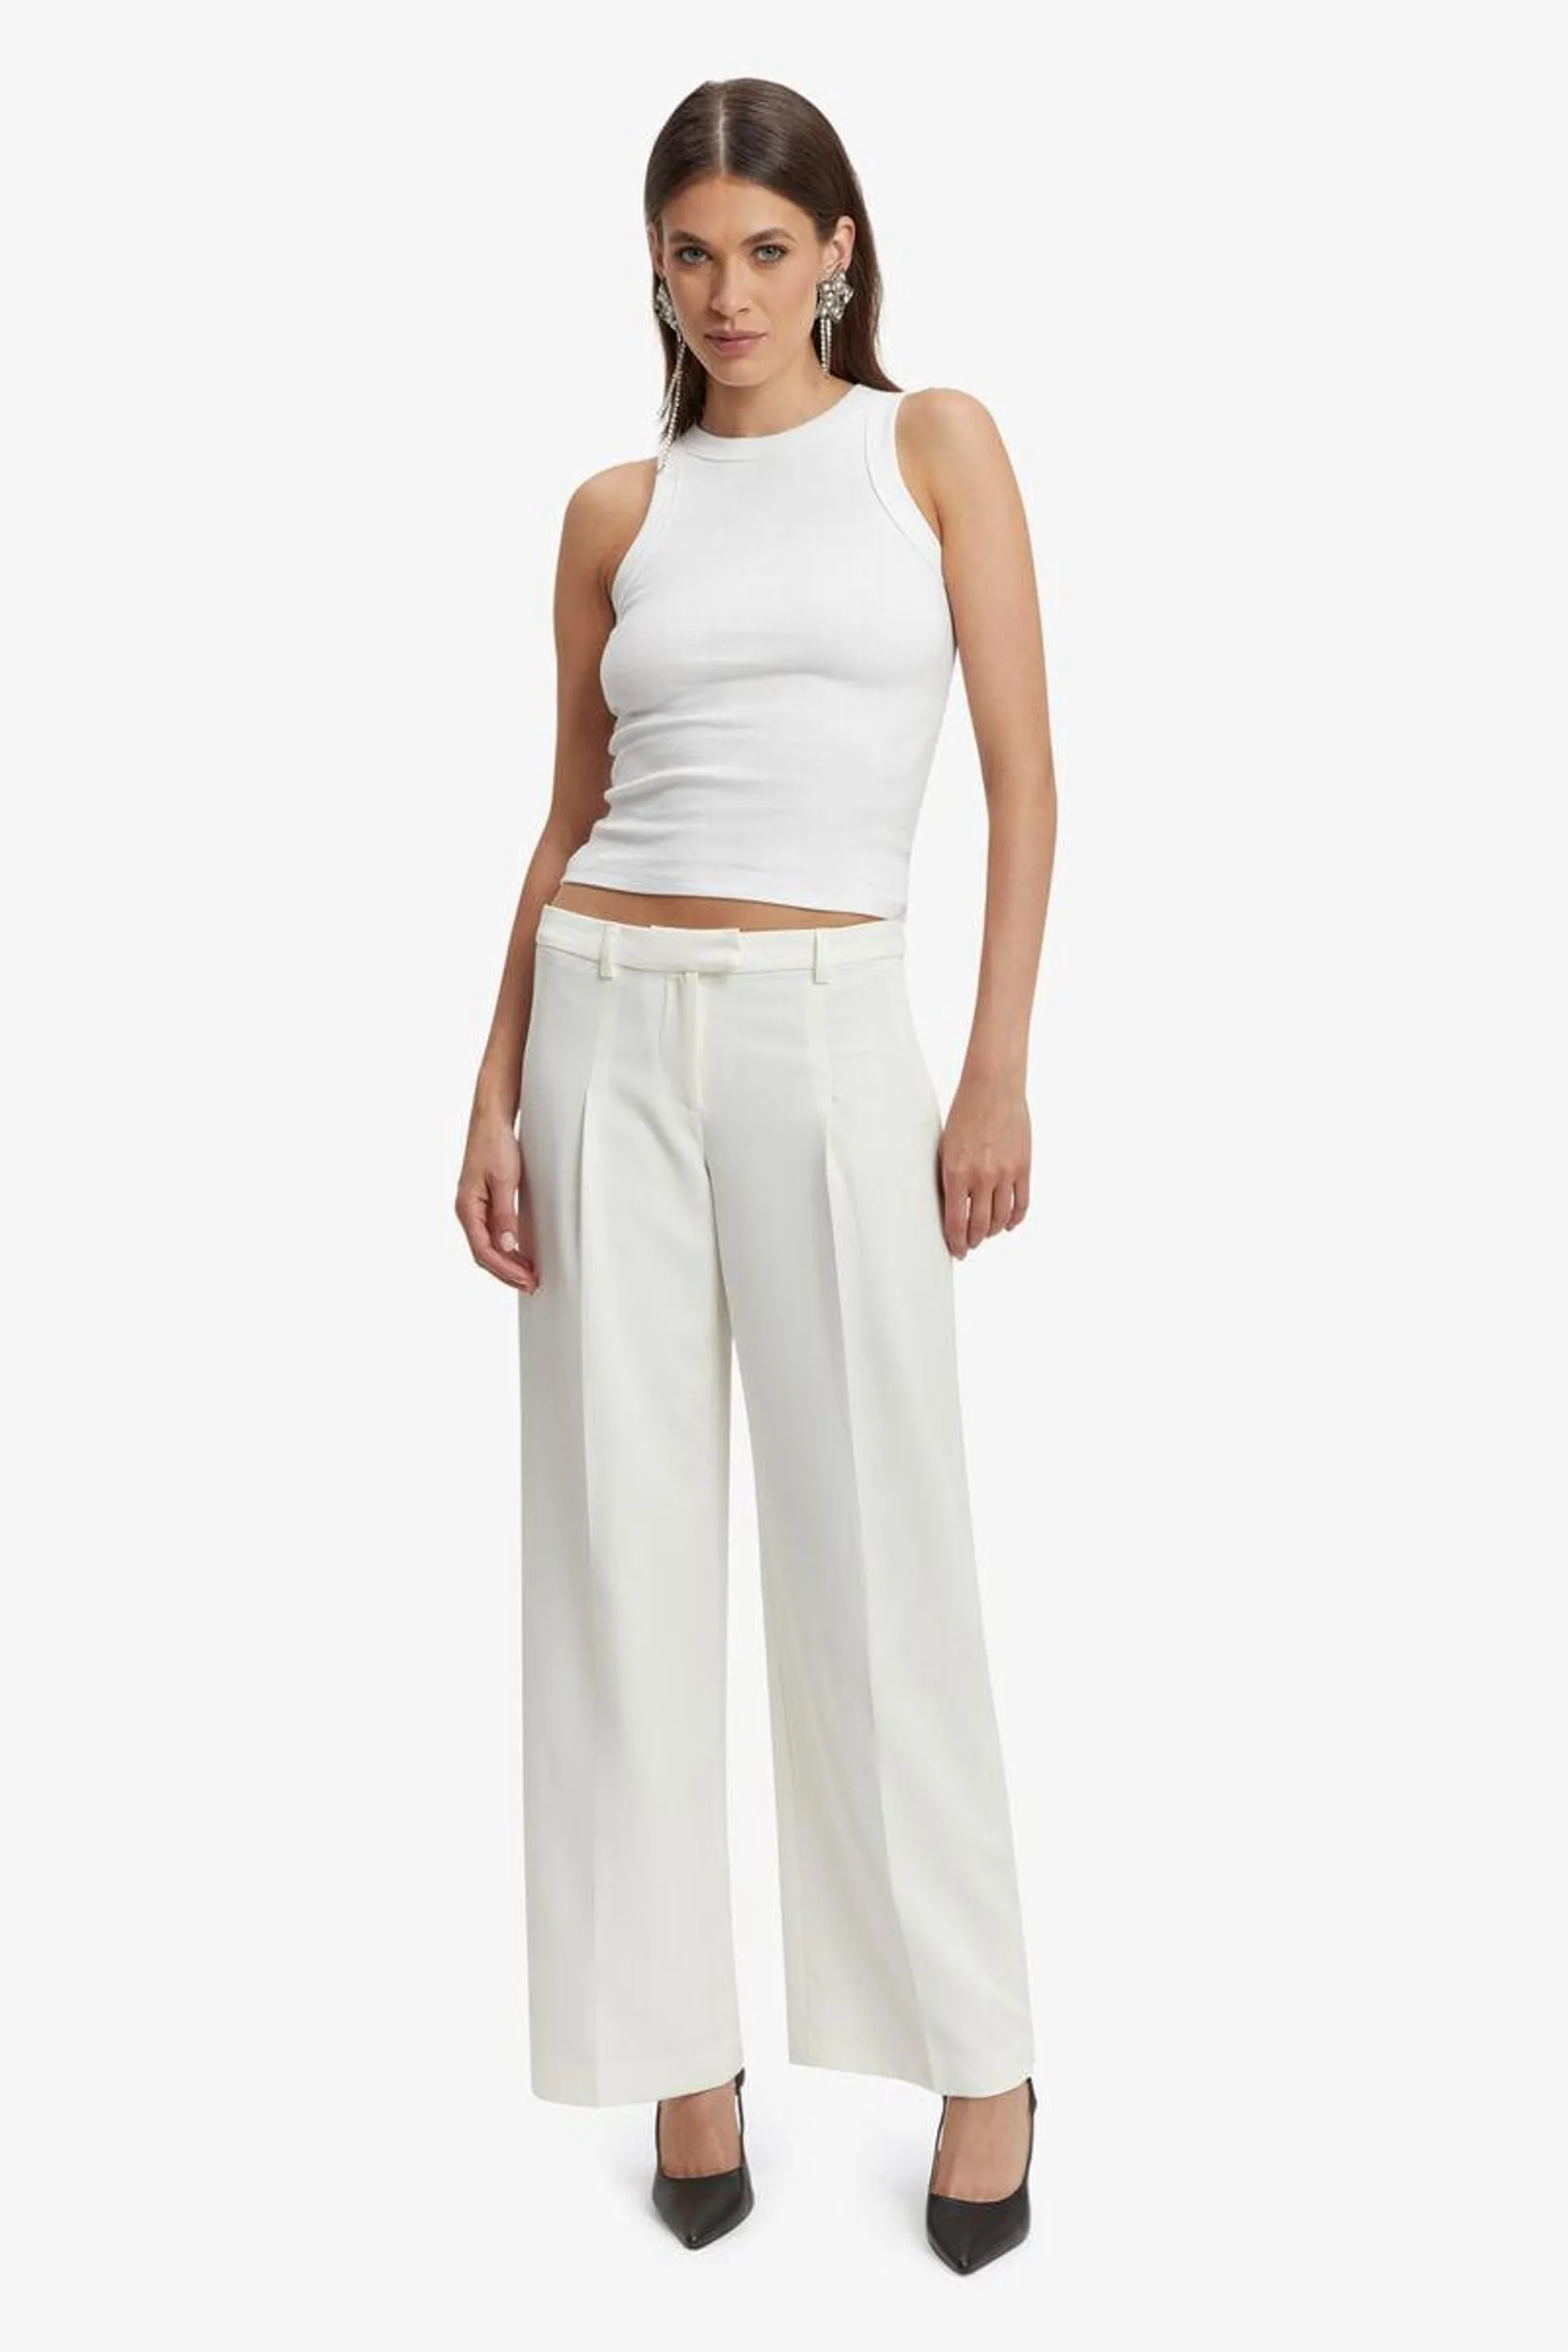 cassian tailored pant in ivory